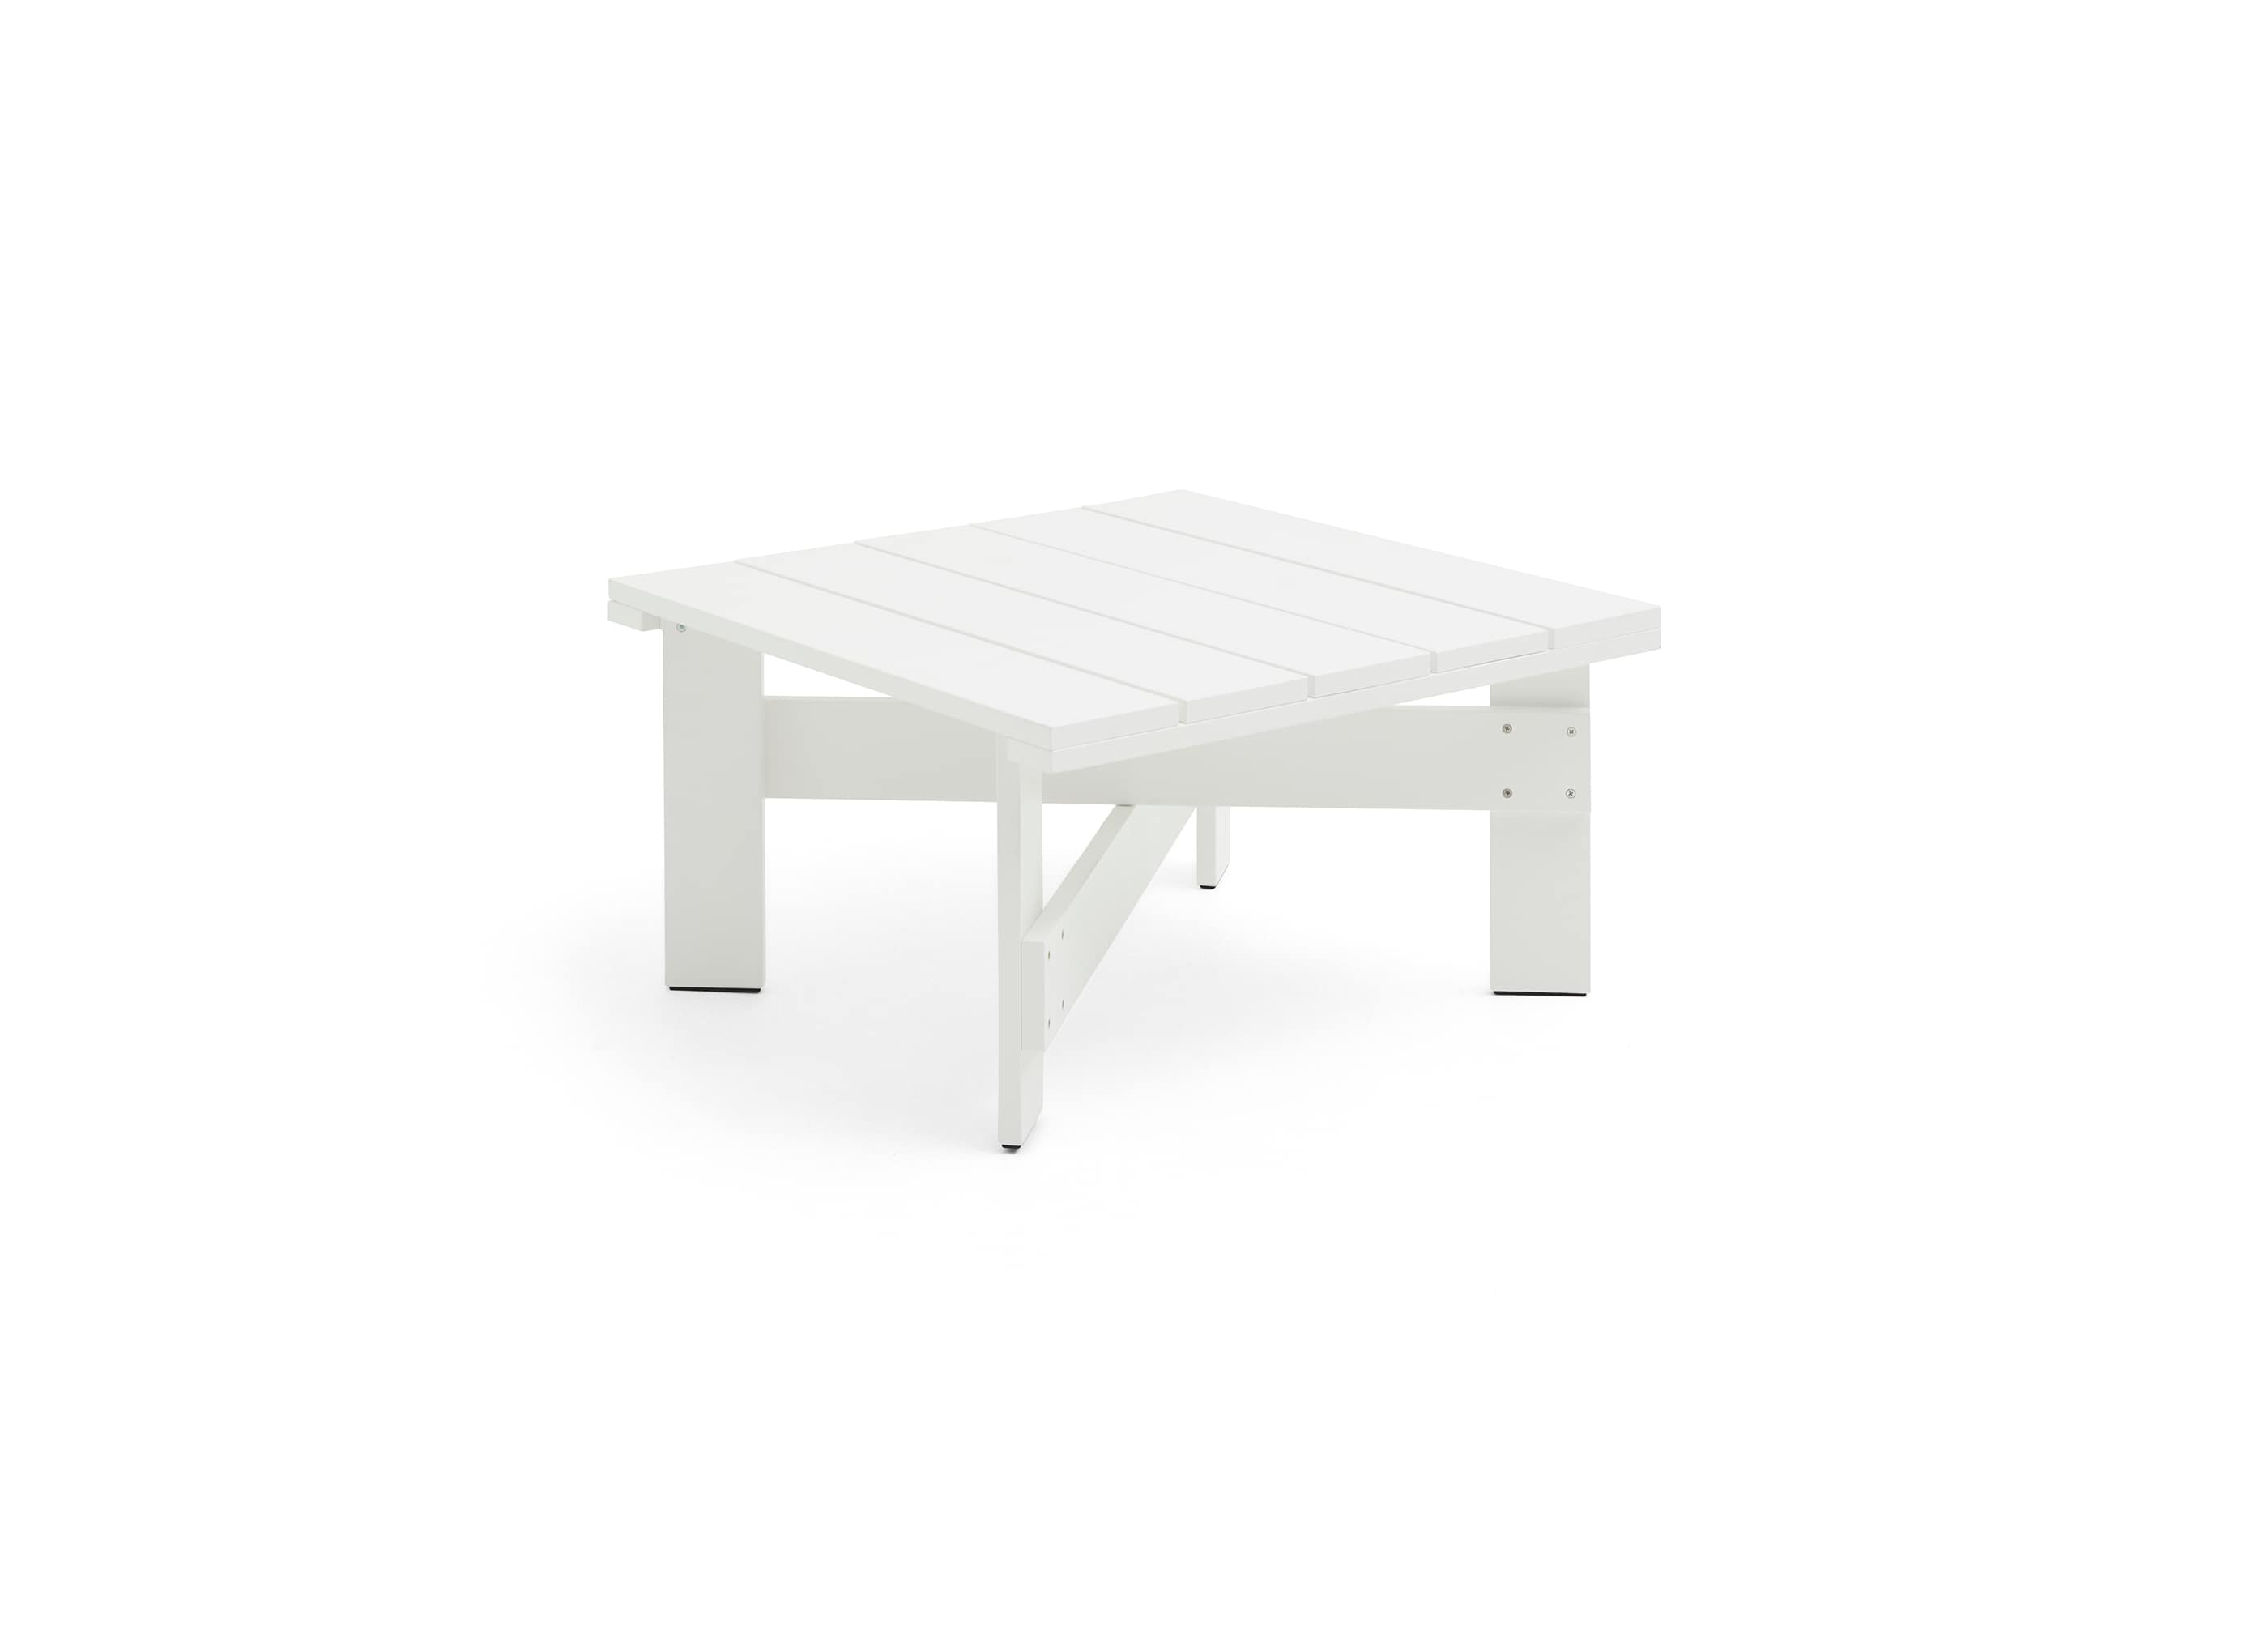 CRATE LOW TABLE / L75.5 x W75.5 x H40 cm